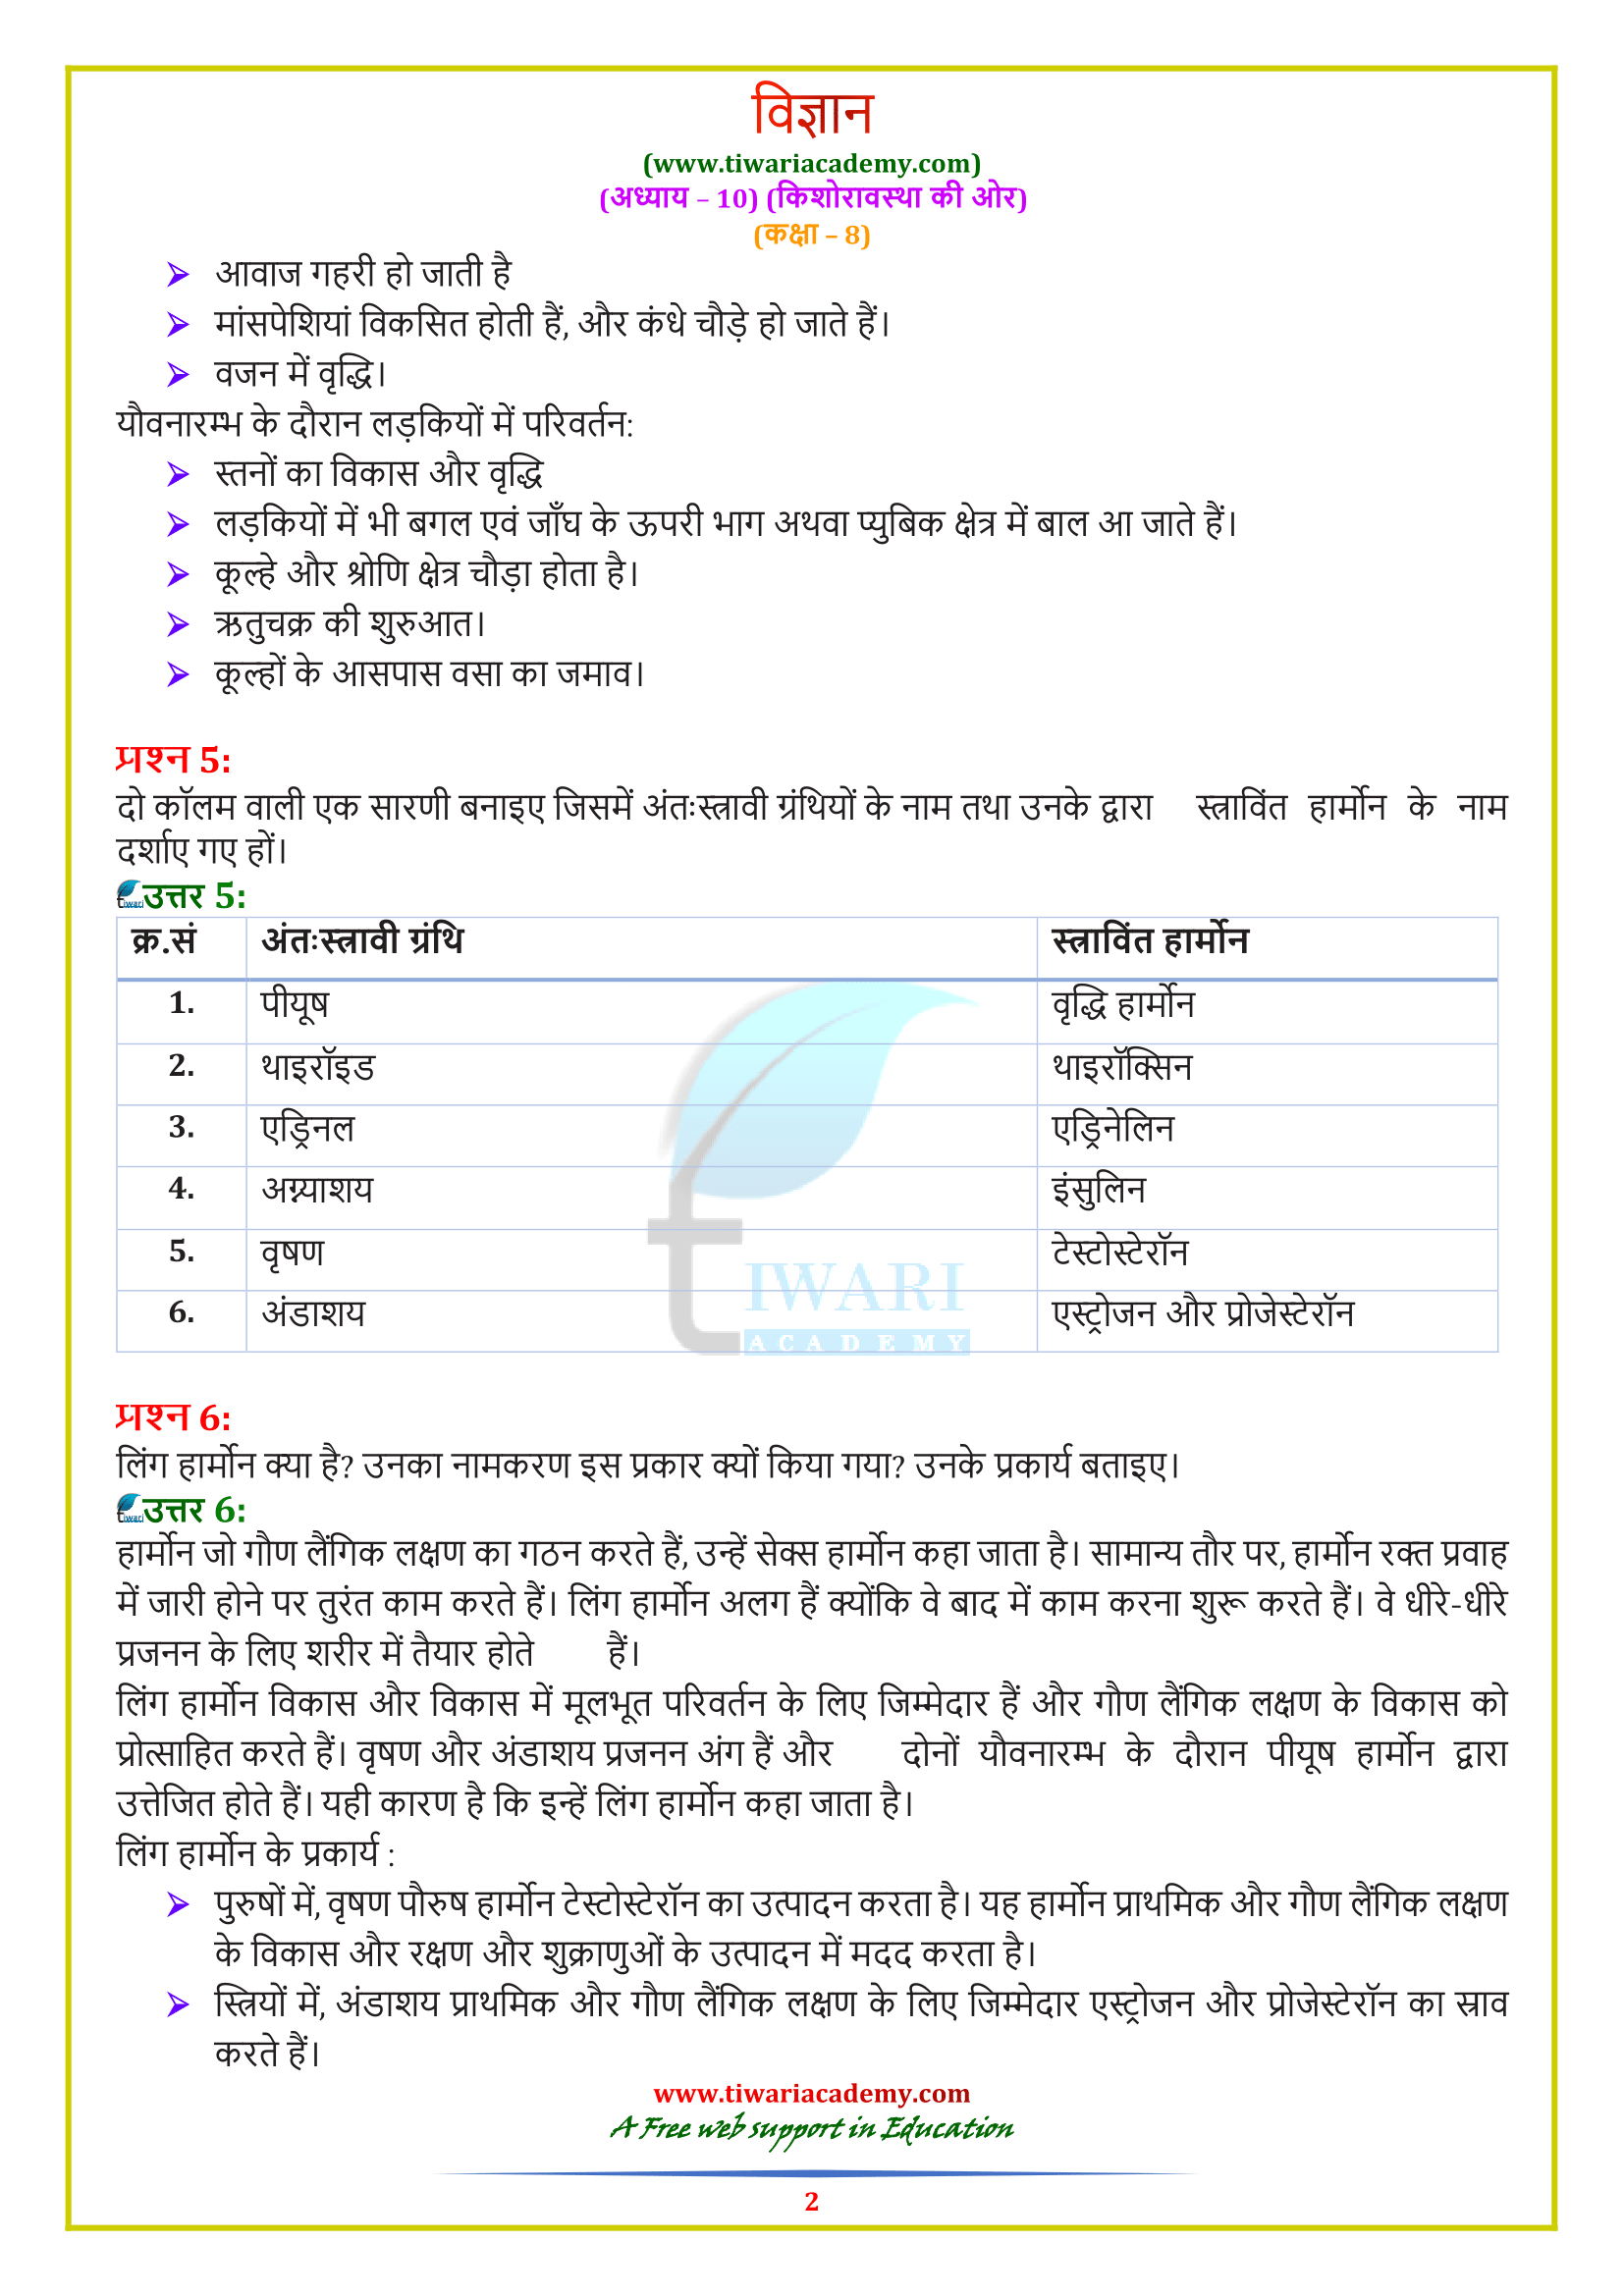 NCERT Solutions for Class 8 Science Chapter 10 in Hindi Medium